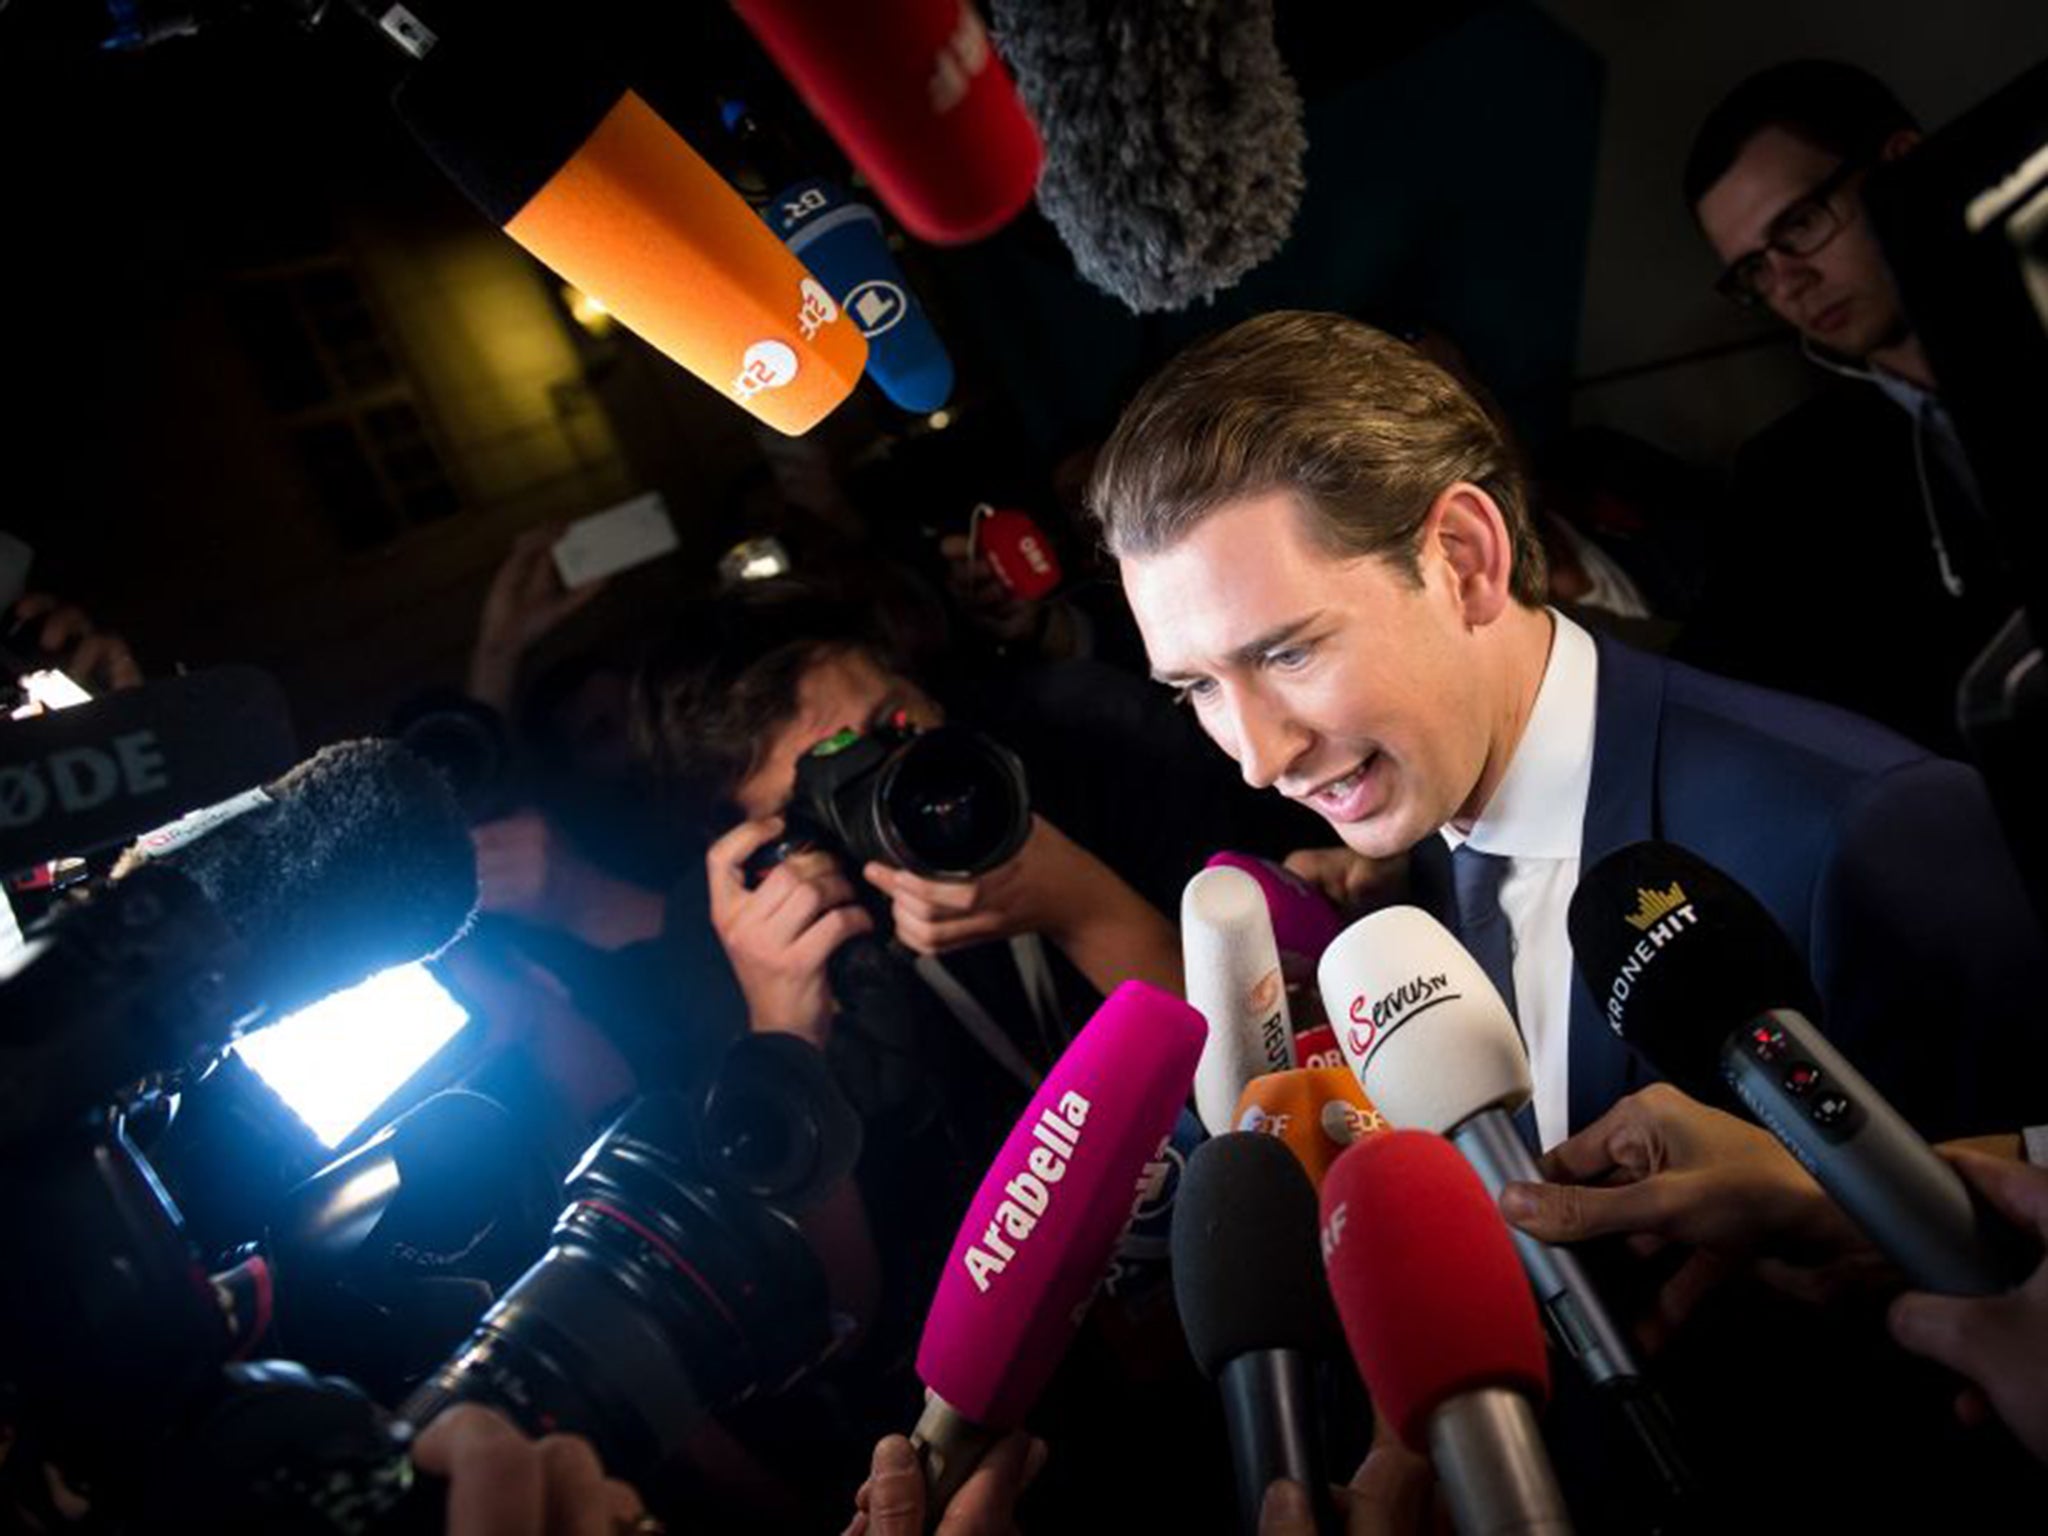 Sebastian Kurz said the EU’s border protection agency Frontex should should have a mandate to act in third countries